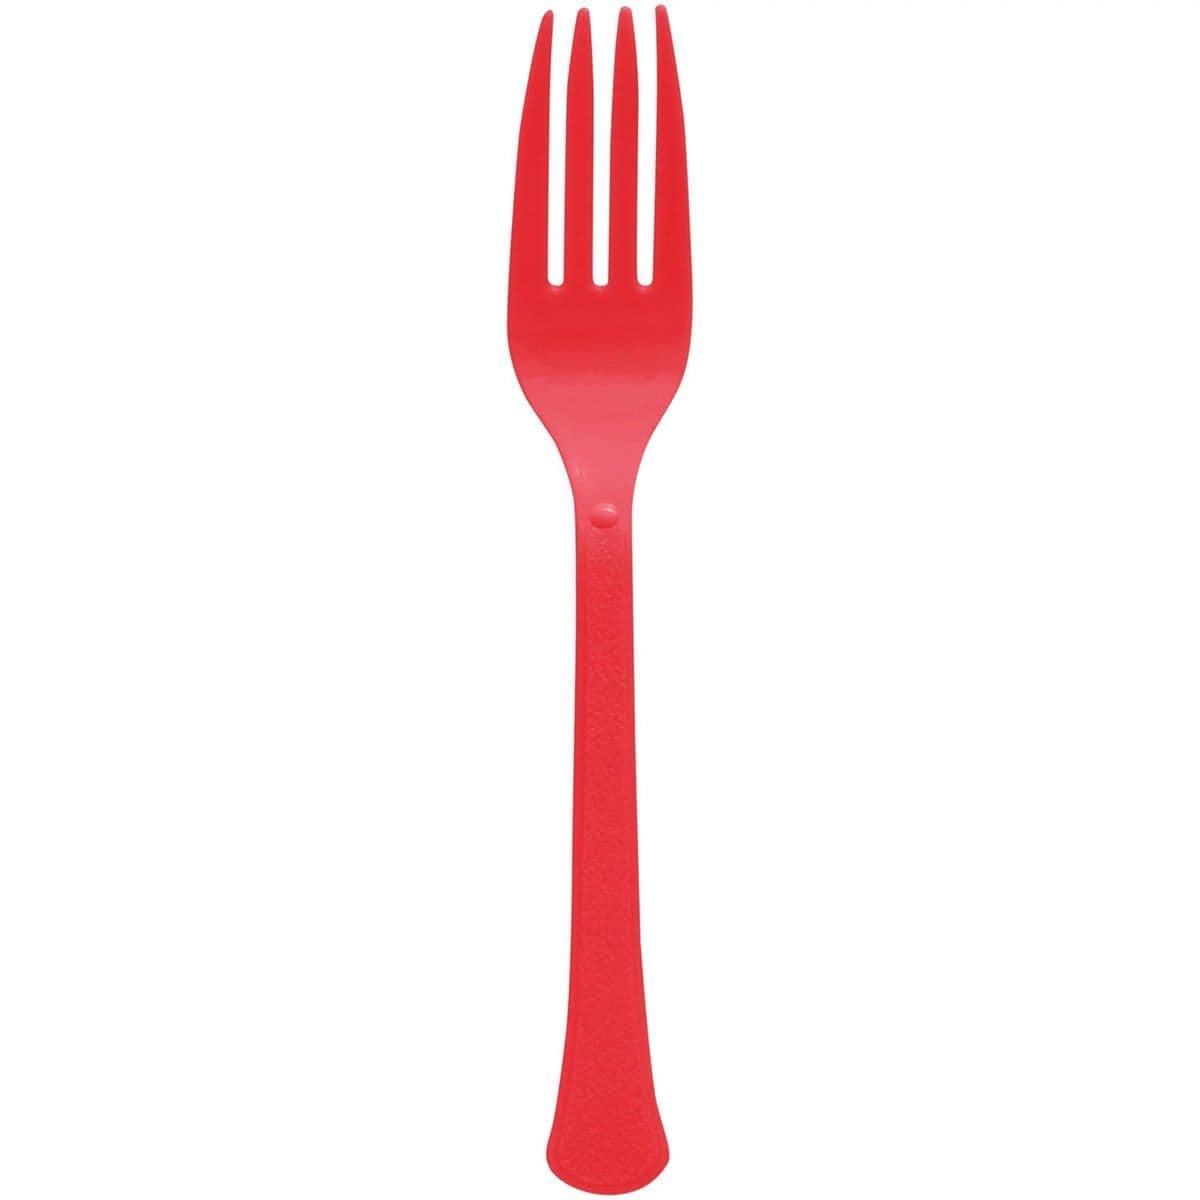 Buy Plasticware Apple Red Plastic Forks, 20 Count sold at Party Expert